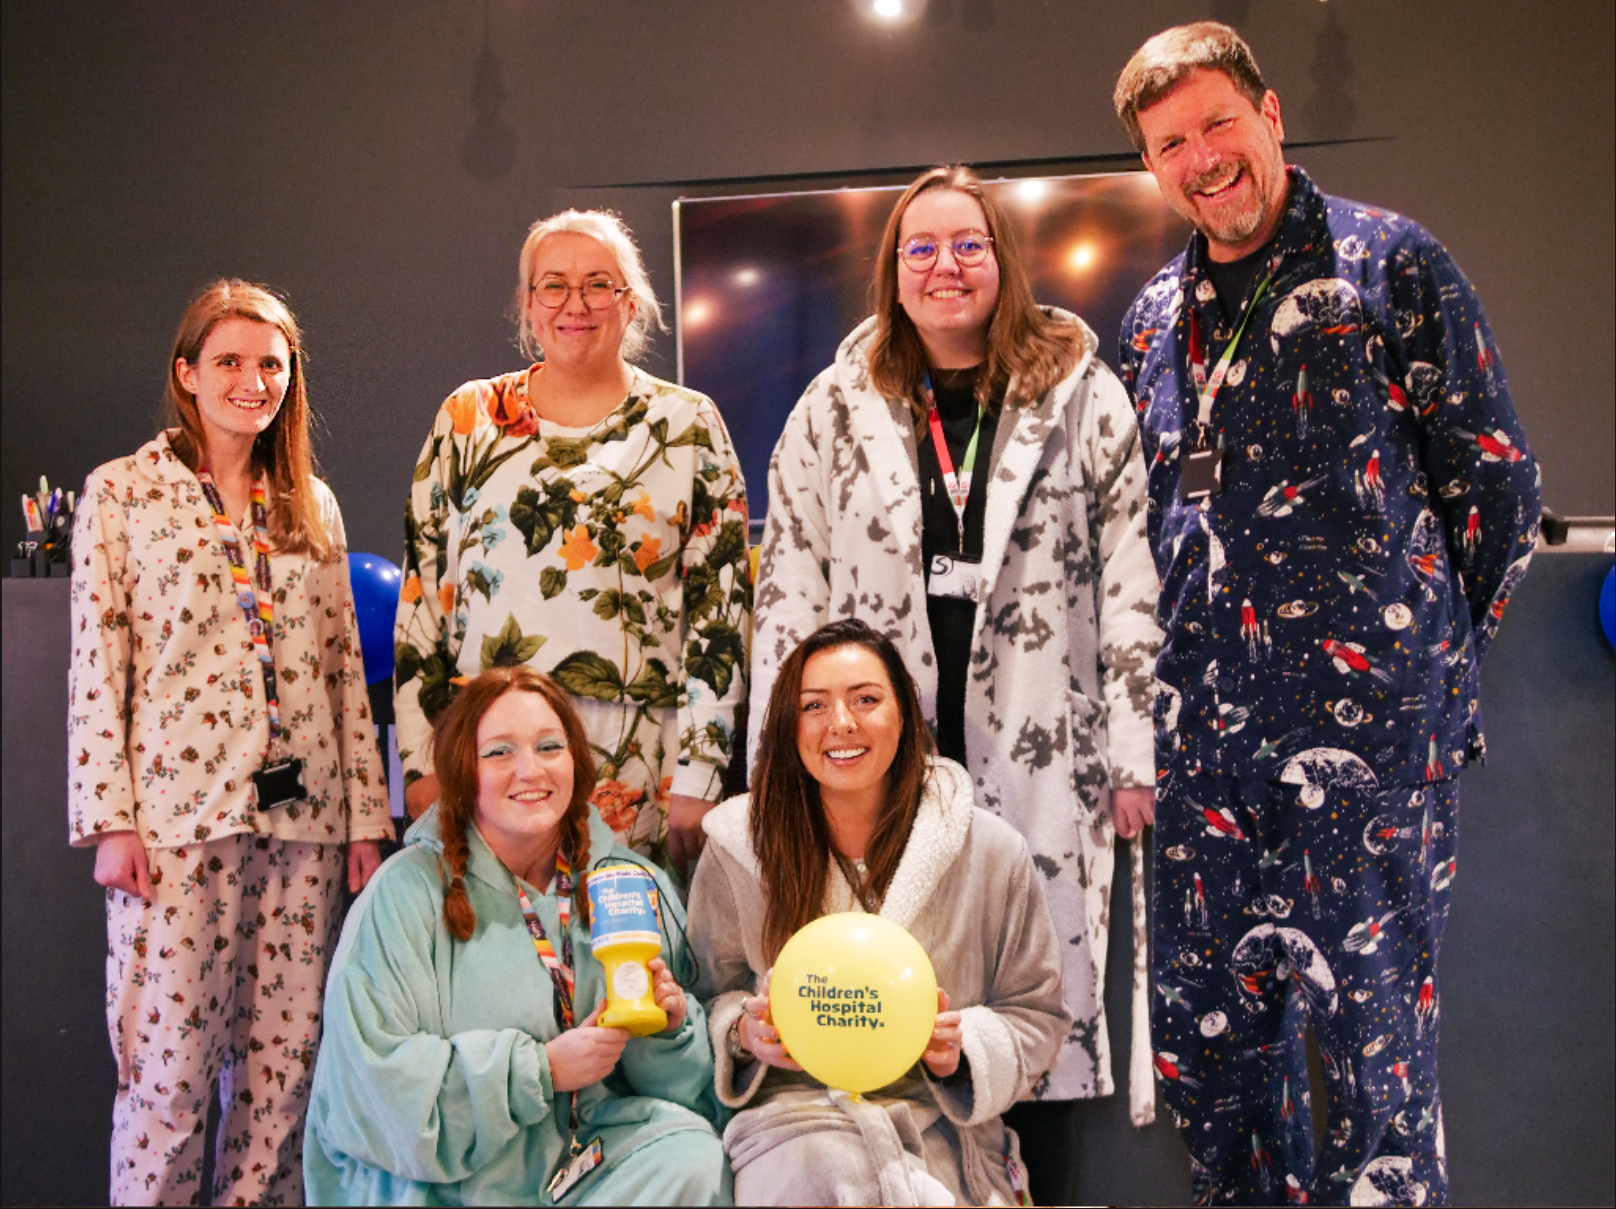 Sumo Sheffield team in their pyjamas for The Children's Hospital Charity